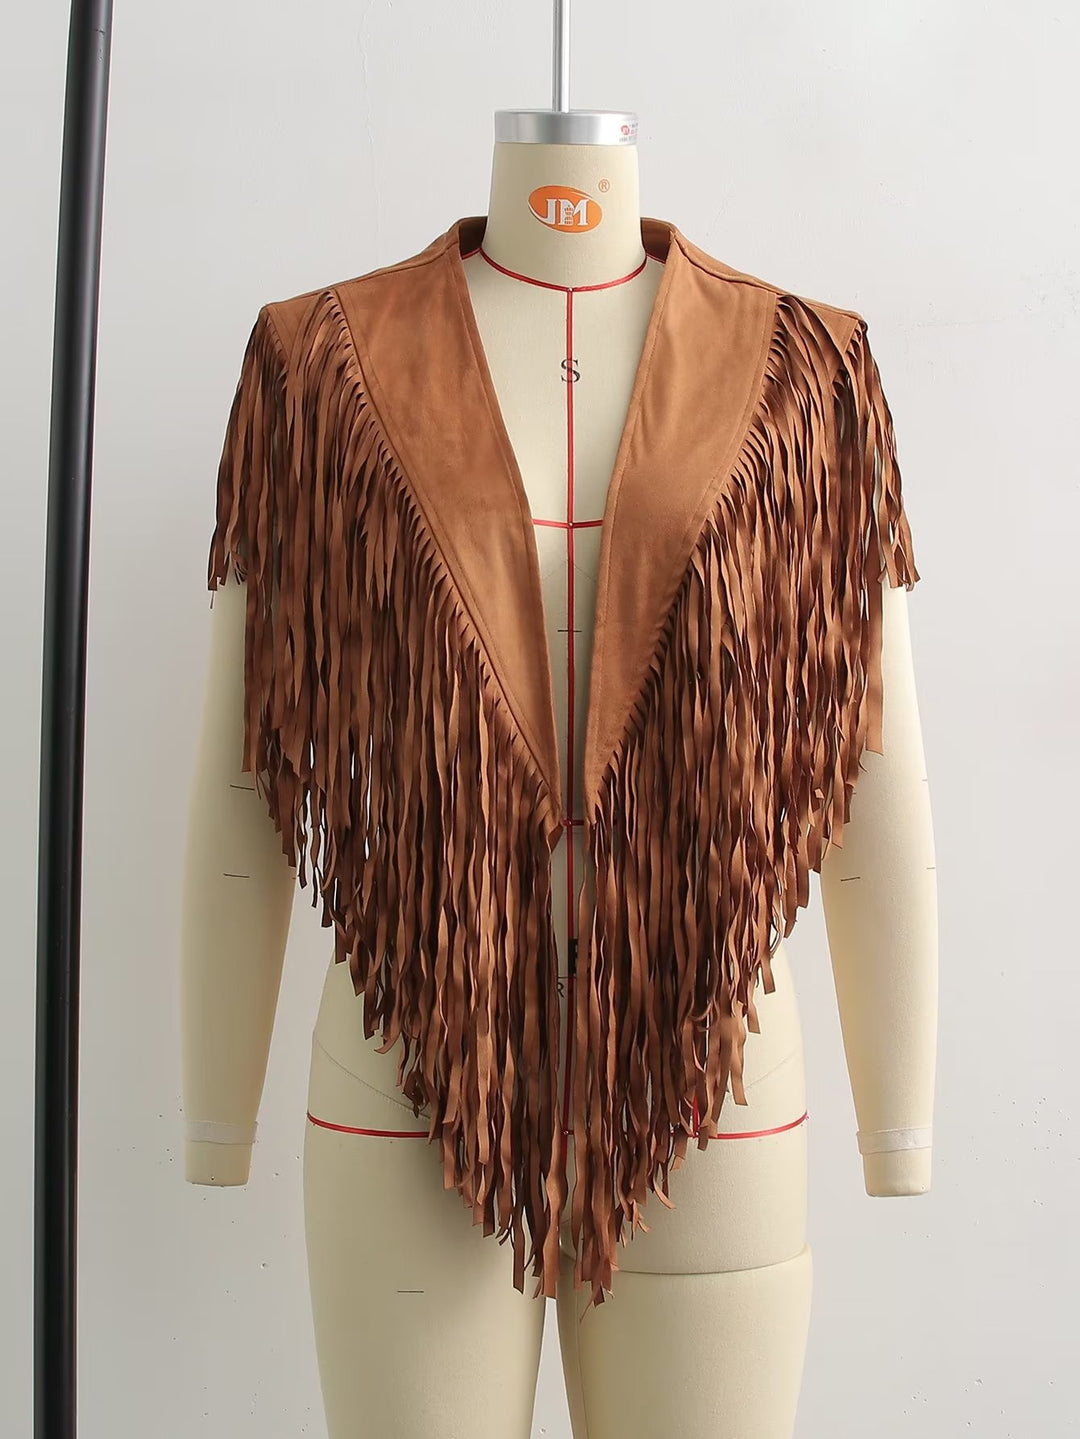 Spring Autumn Fashionable Sexy Personality Tassel Suede Cardigan Vest Top